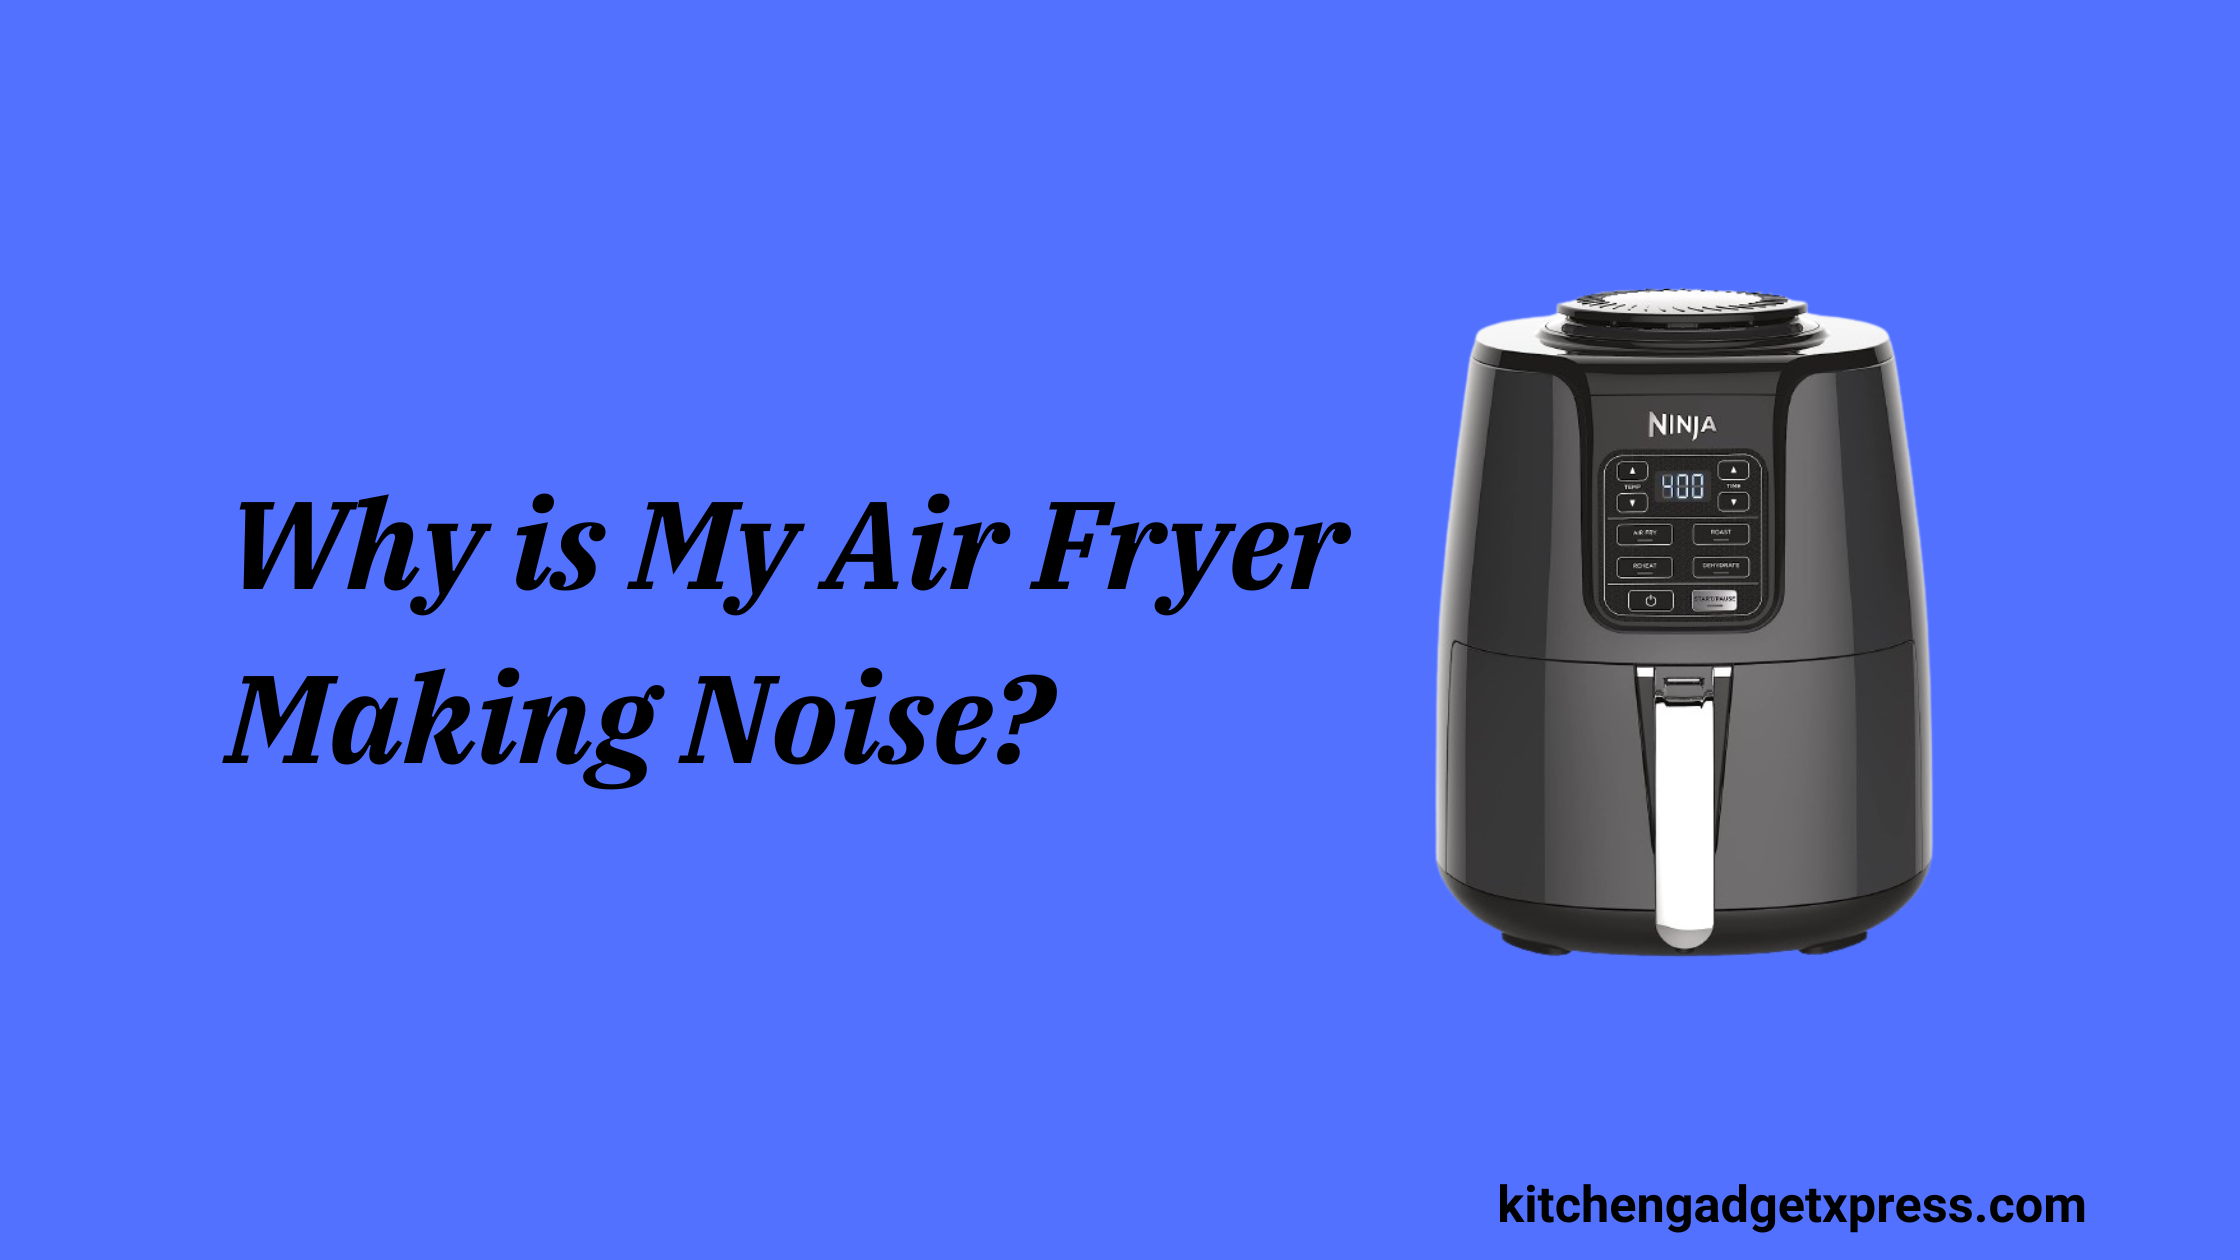 Why is My Air Fryer Making Noise?